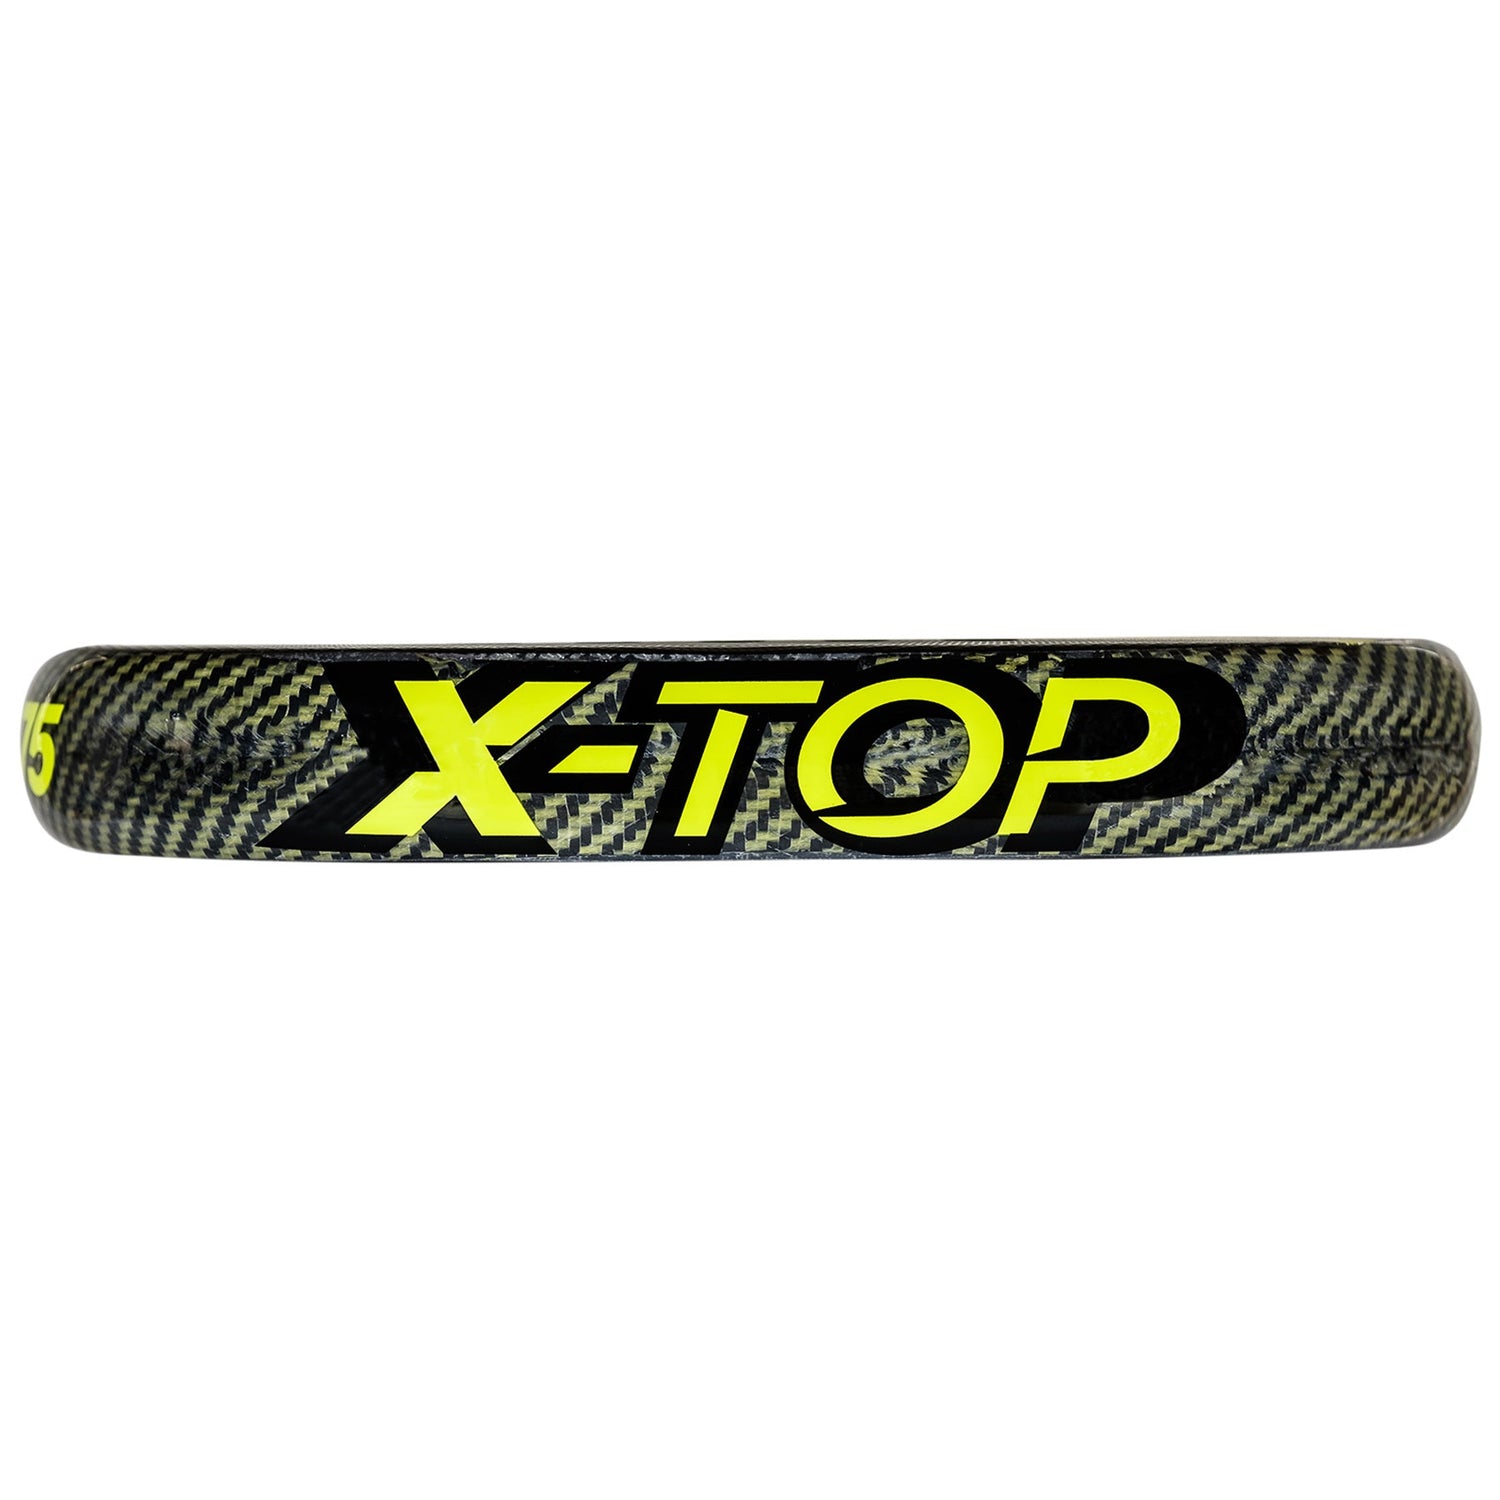 Tecnifibre Wall Breaker X-Top 375 with Cutting-edge X-TOP Technology